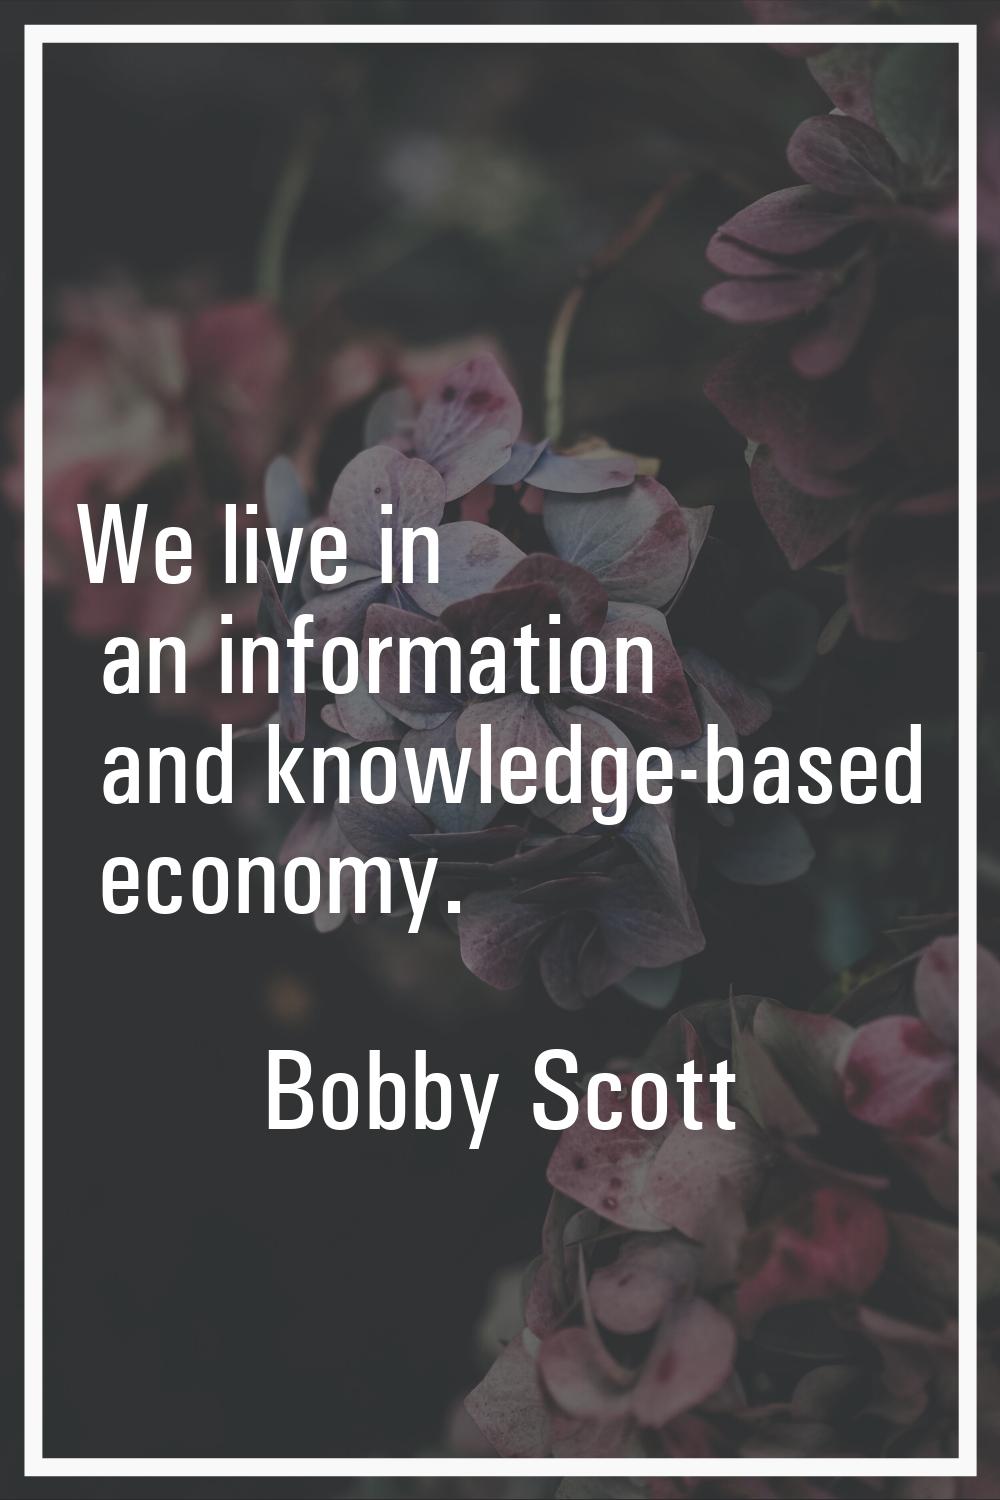 We live in an information and knowledge-based economy.